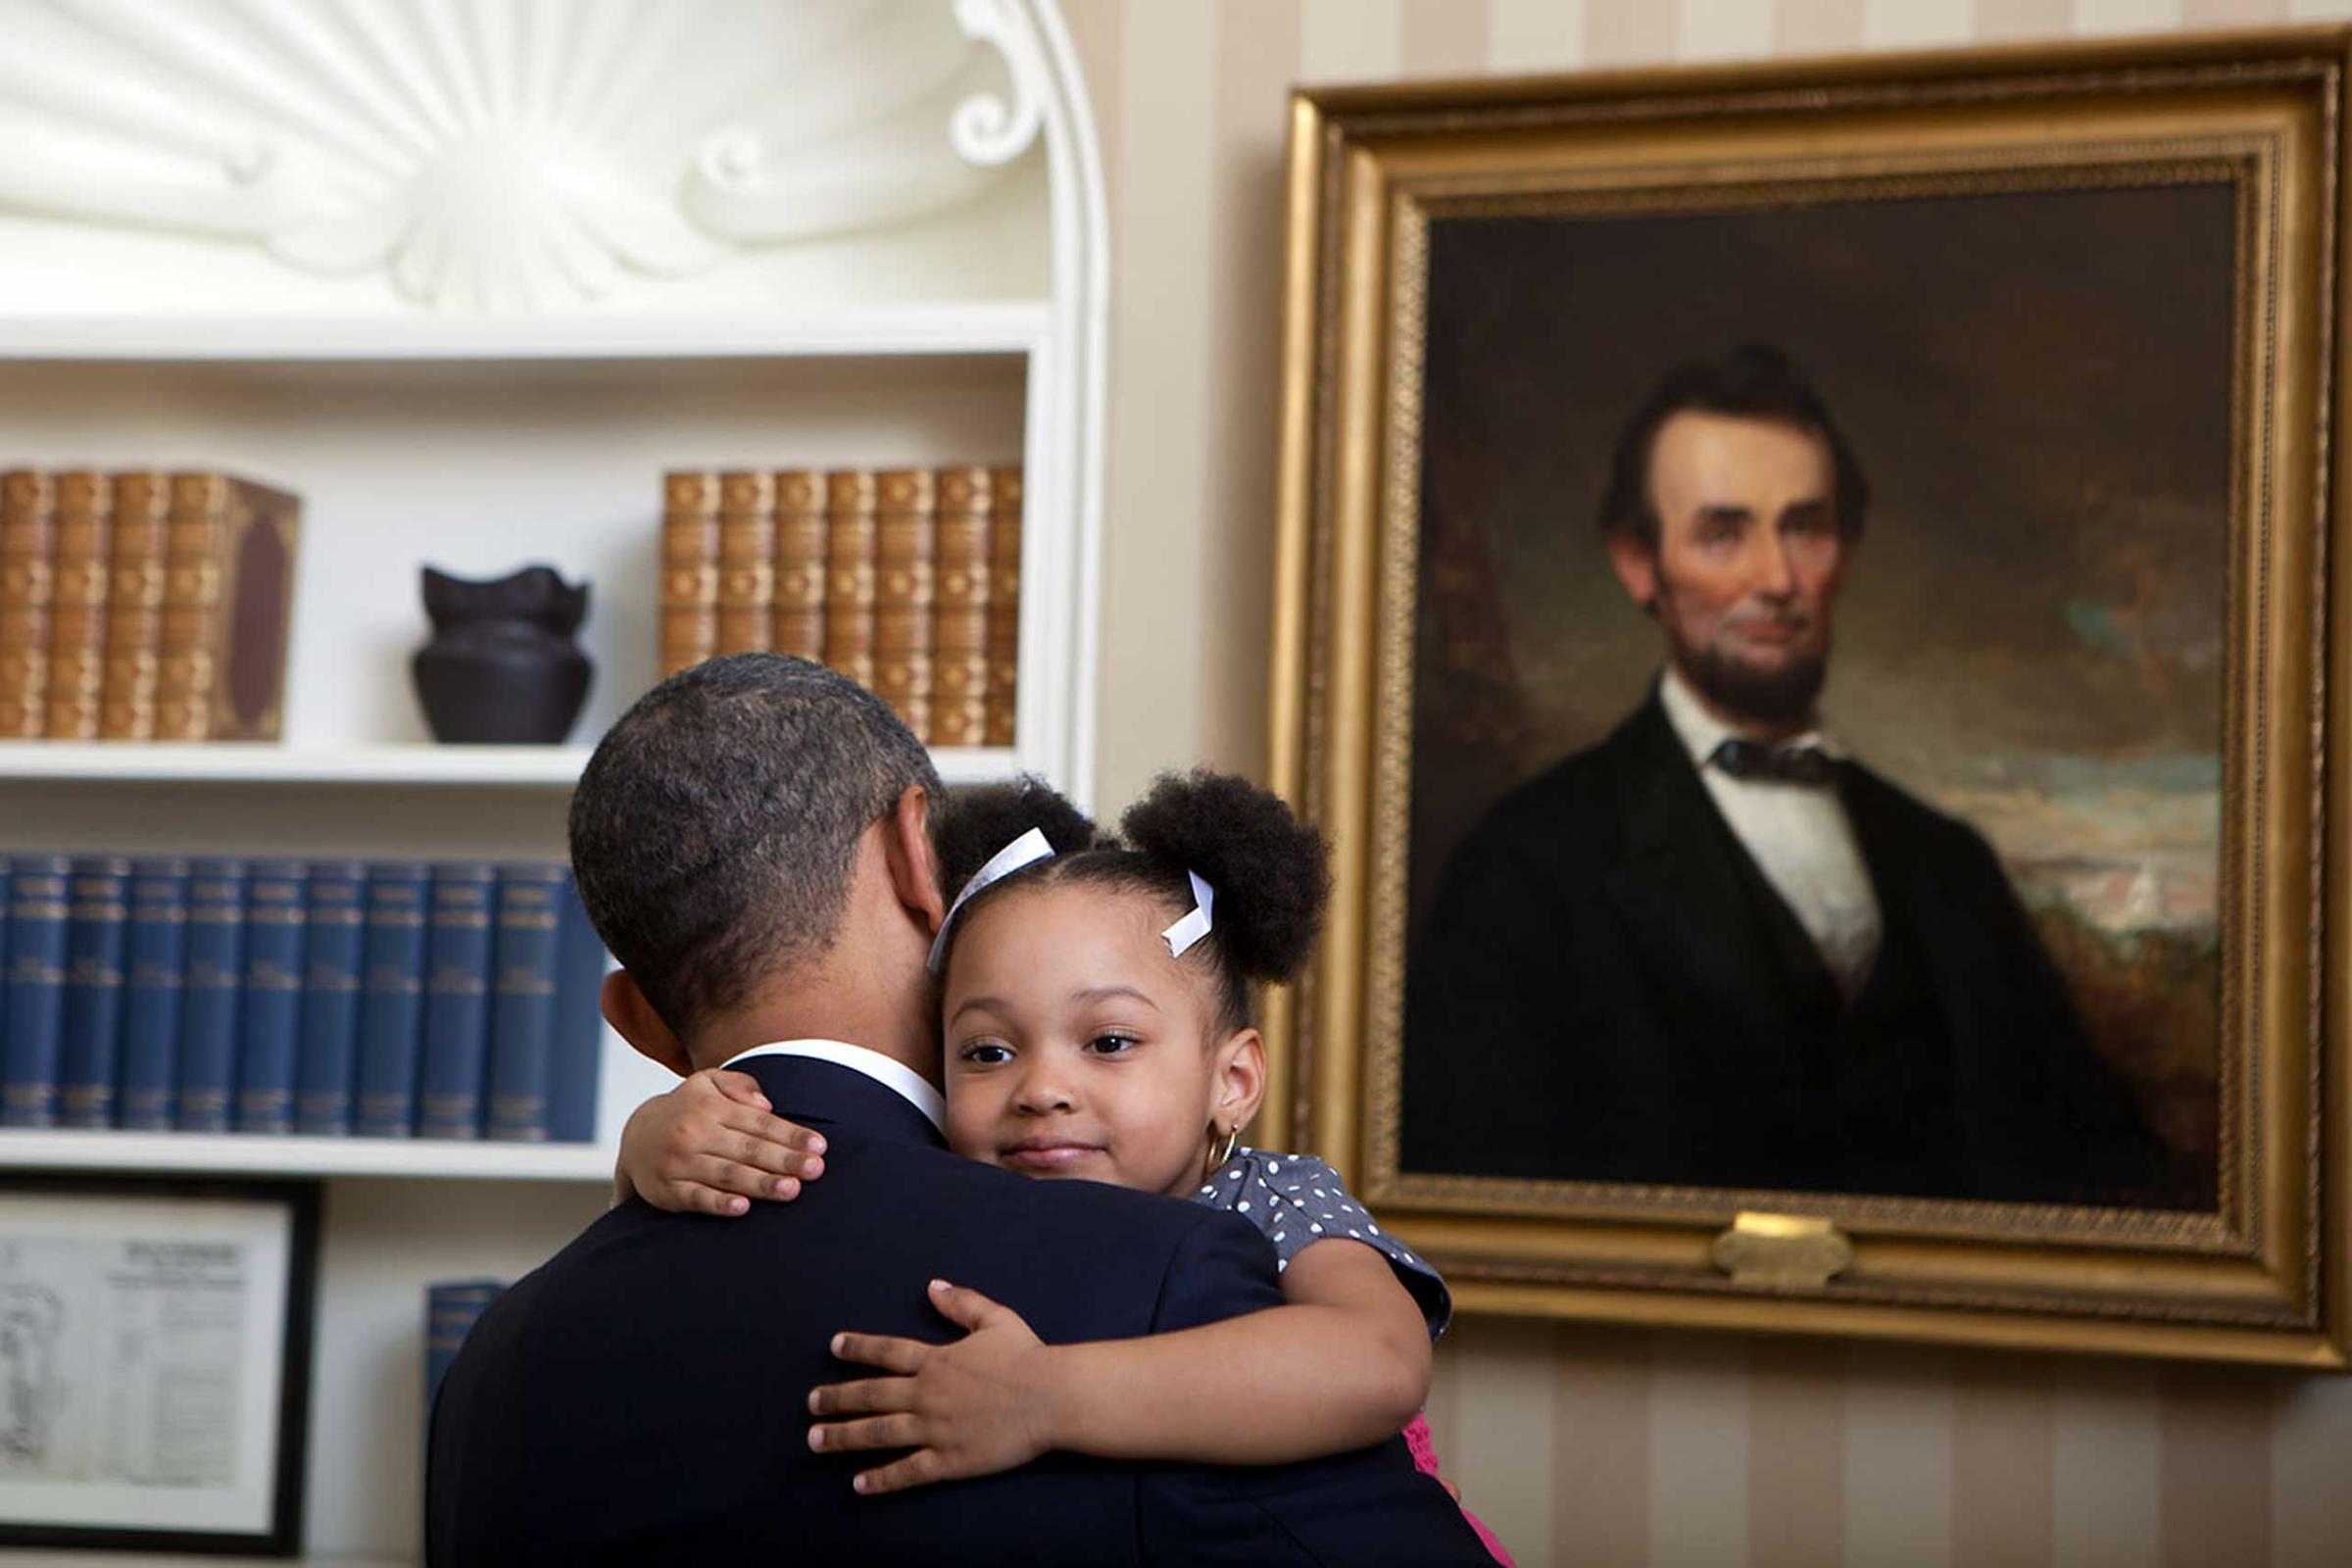 President Obama greets the daughter of national security staffer during a departure photo in the Oval Office, Feb. 1, 2012.